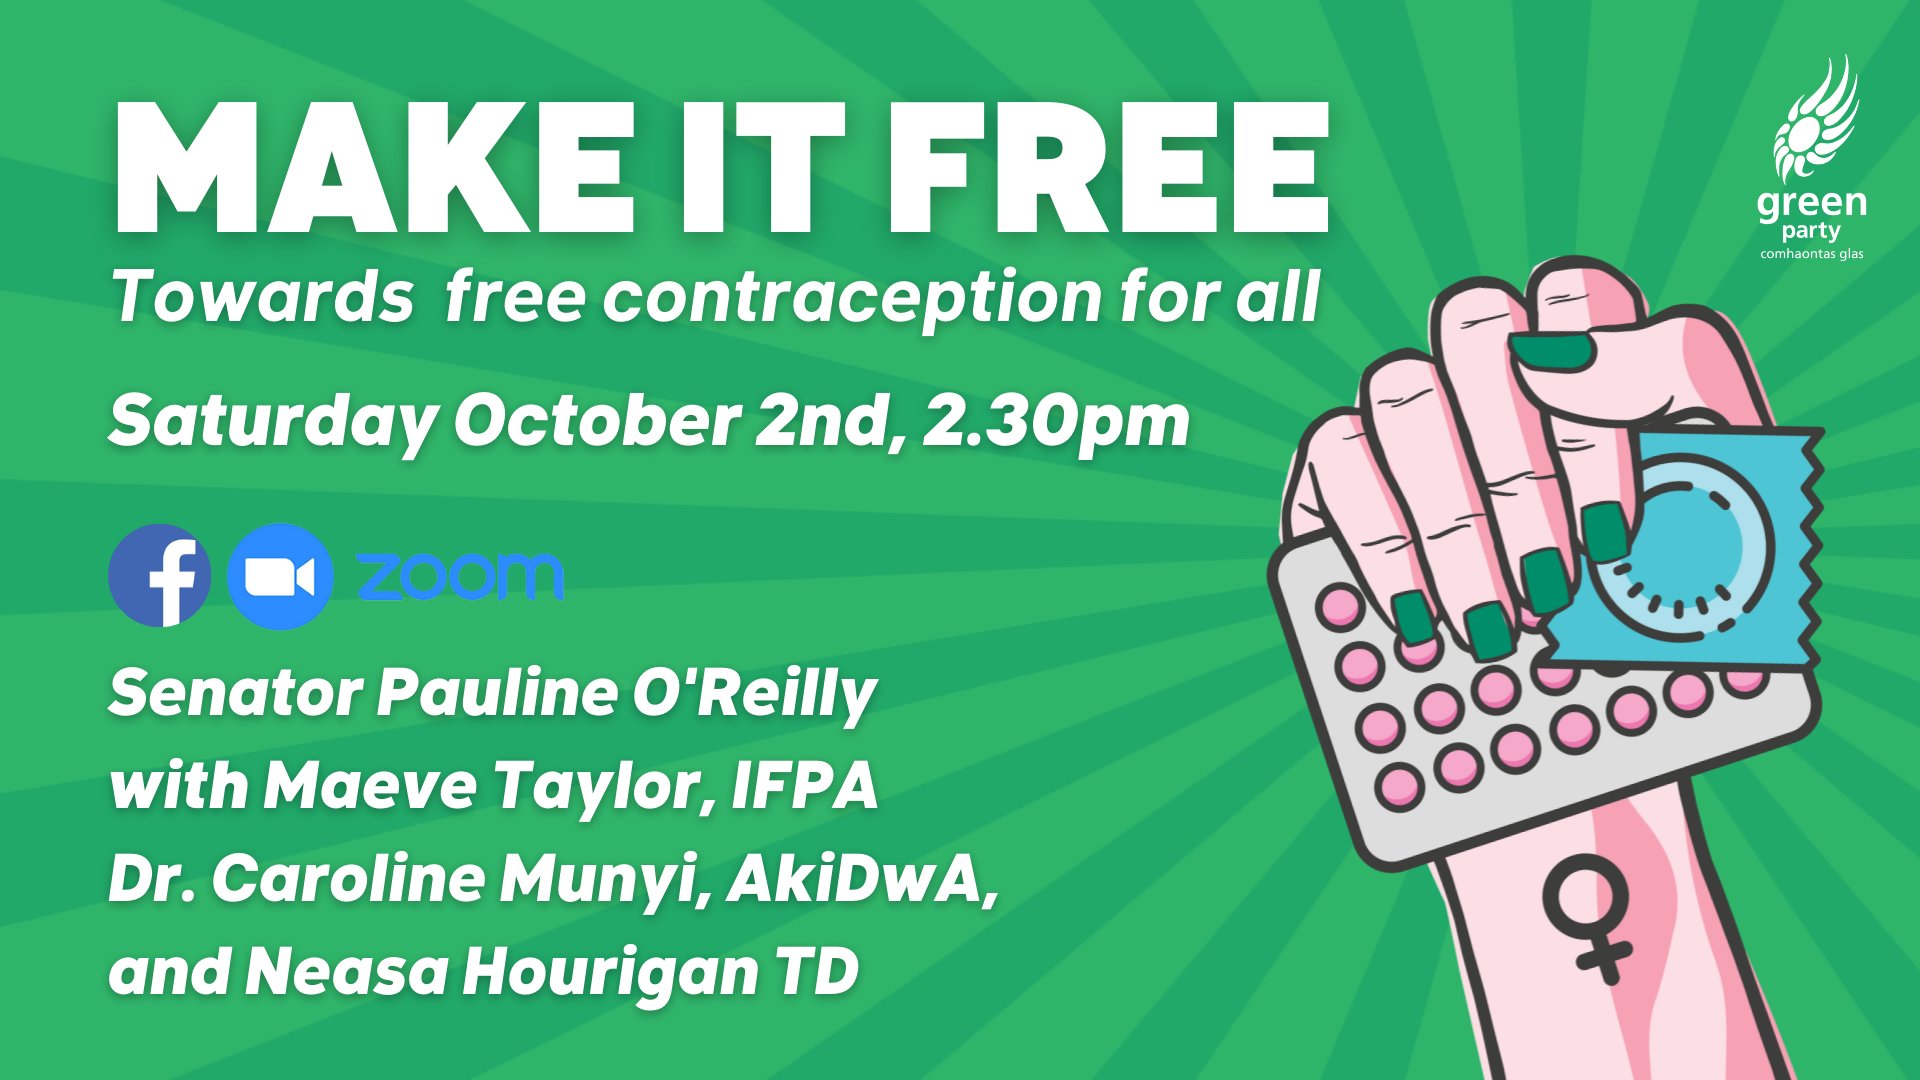 Make it Free event, Saturday October 2nd